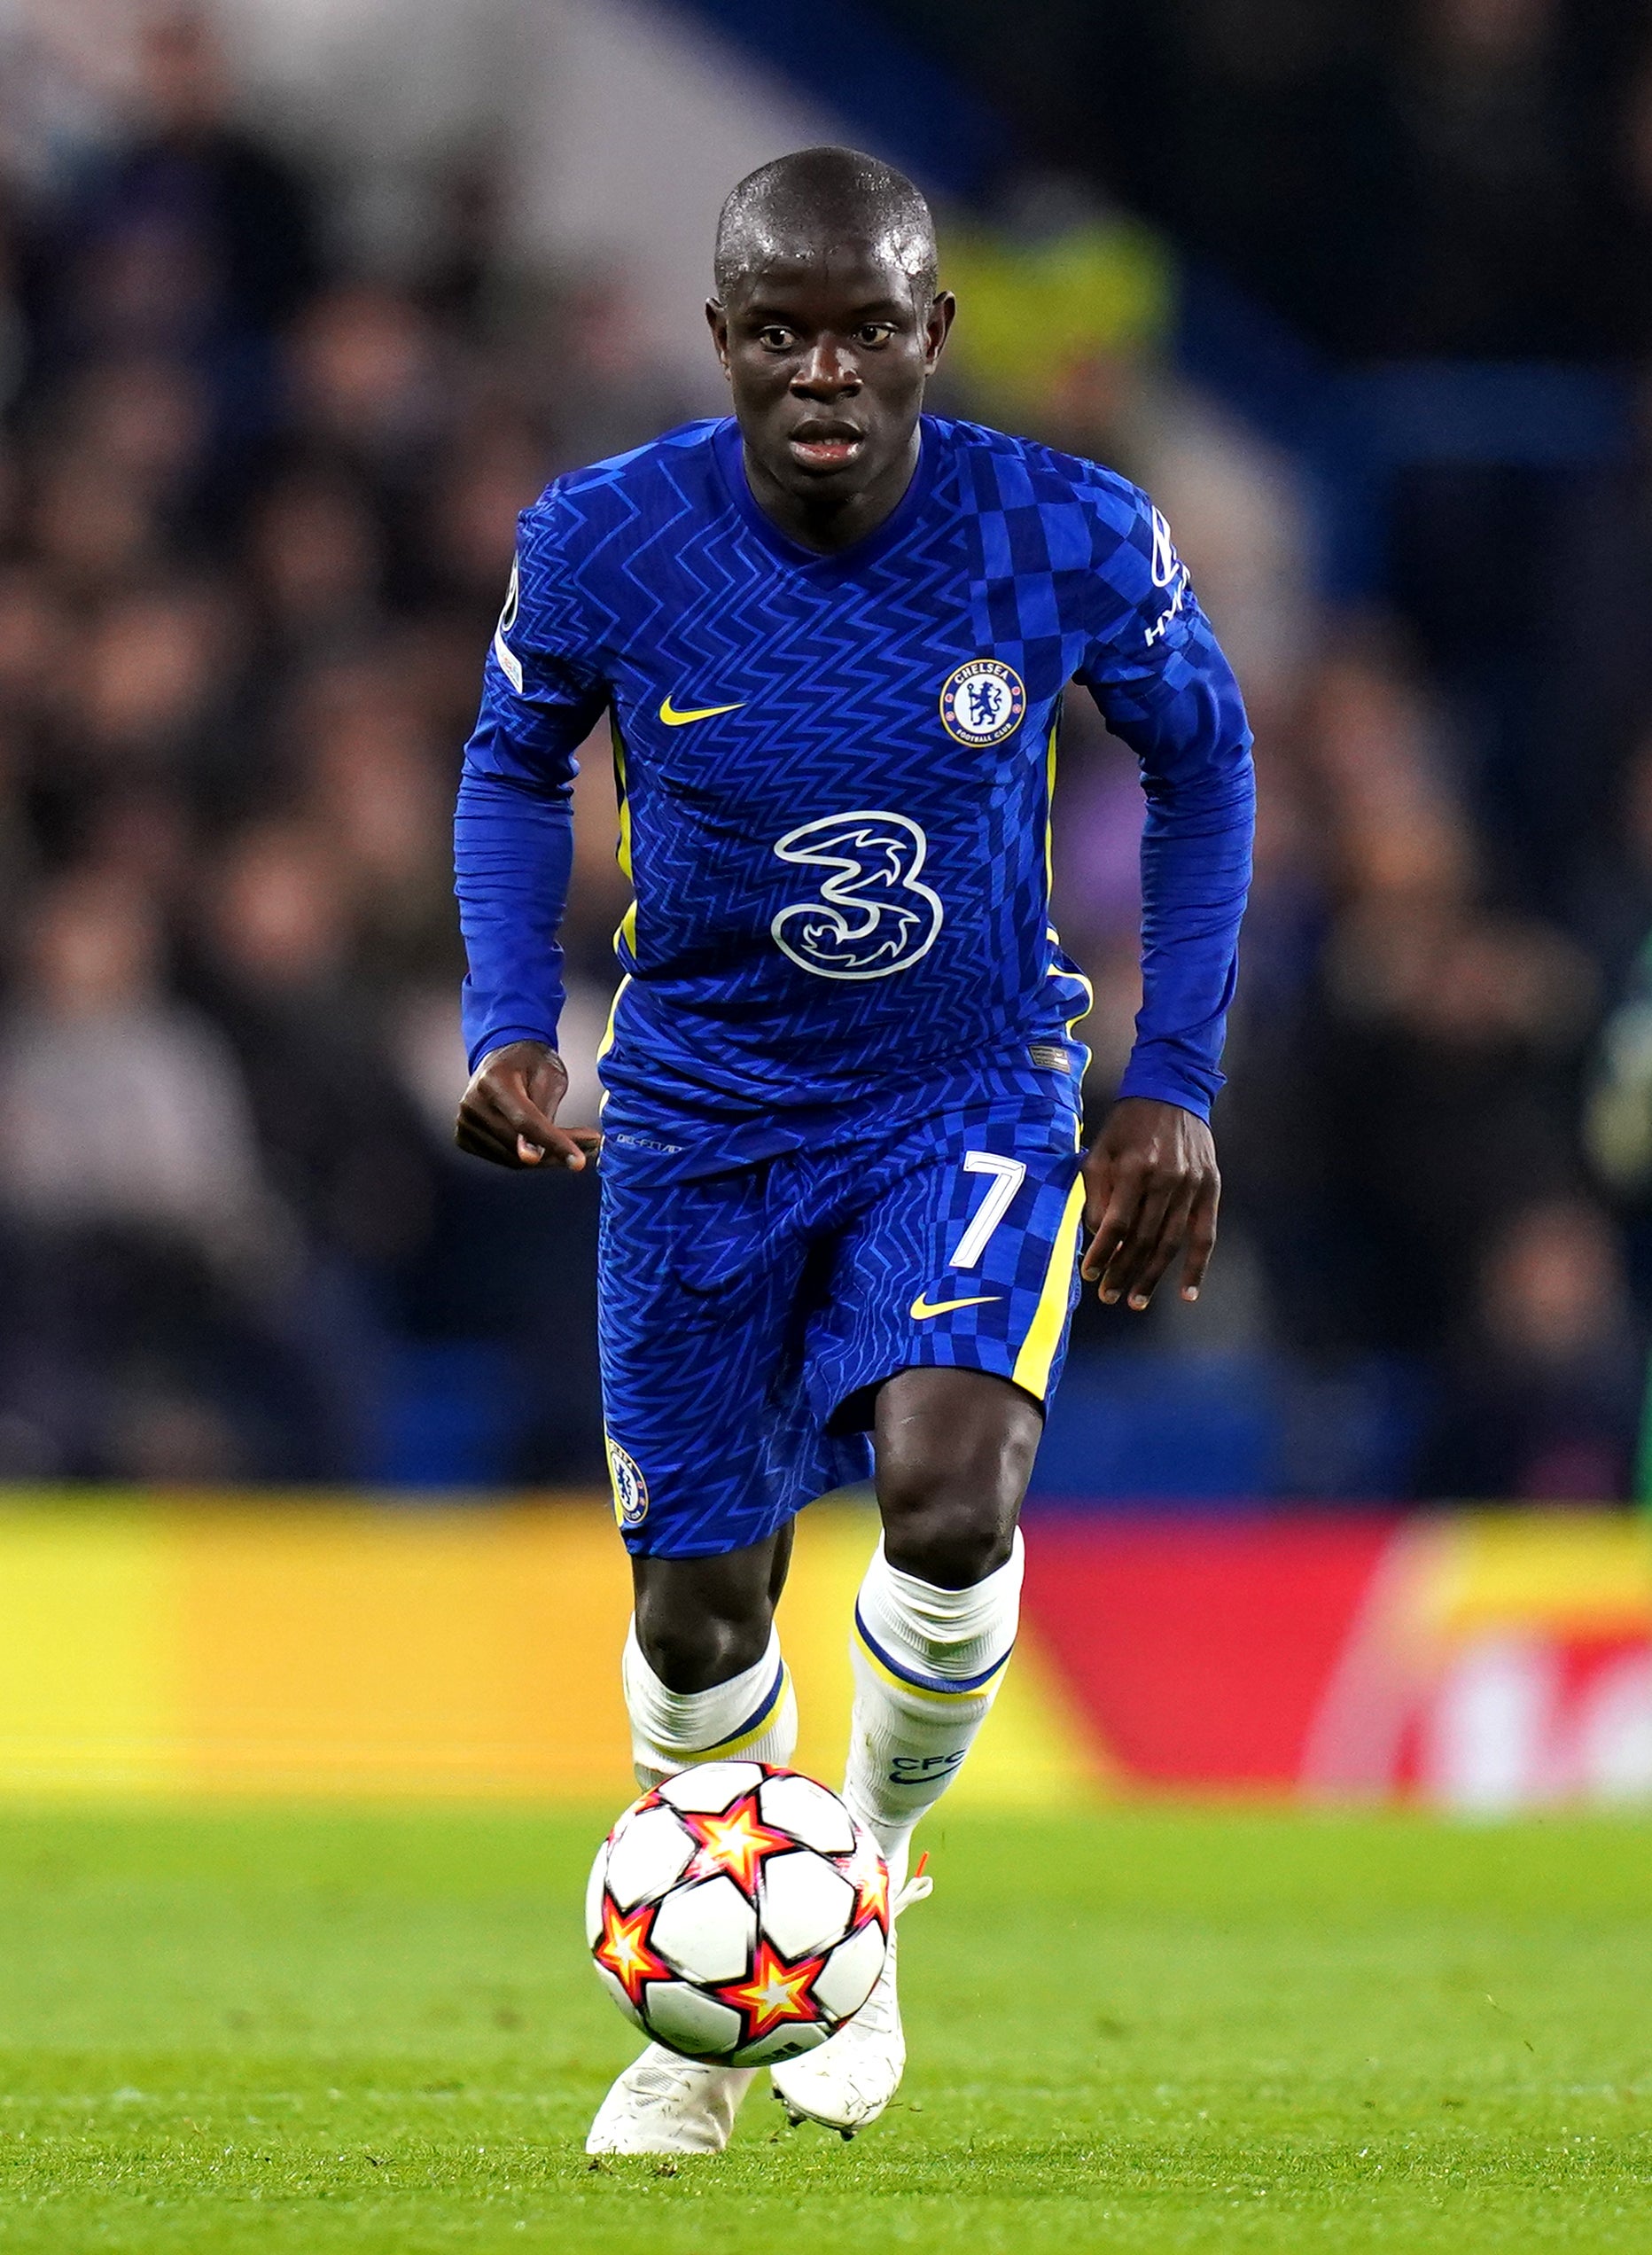 N’Golo Kante started for Chelsea following injury (Adam Davy/PA)